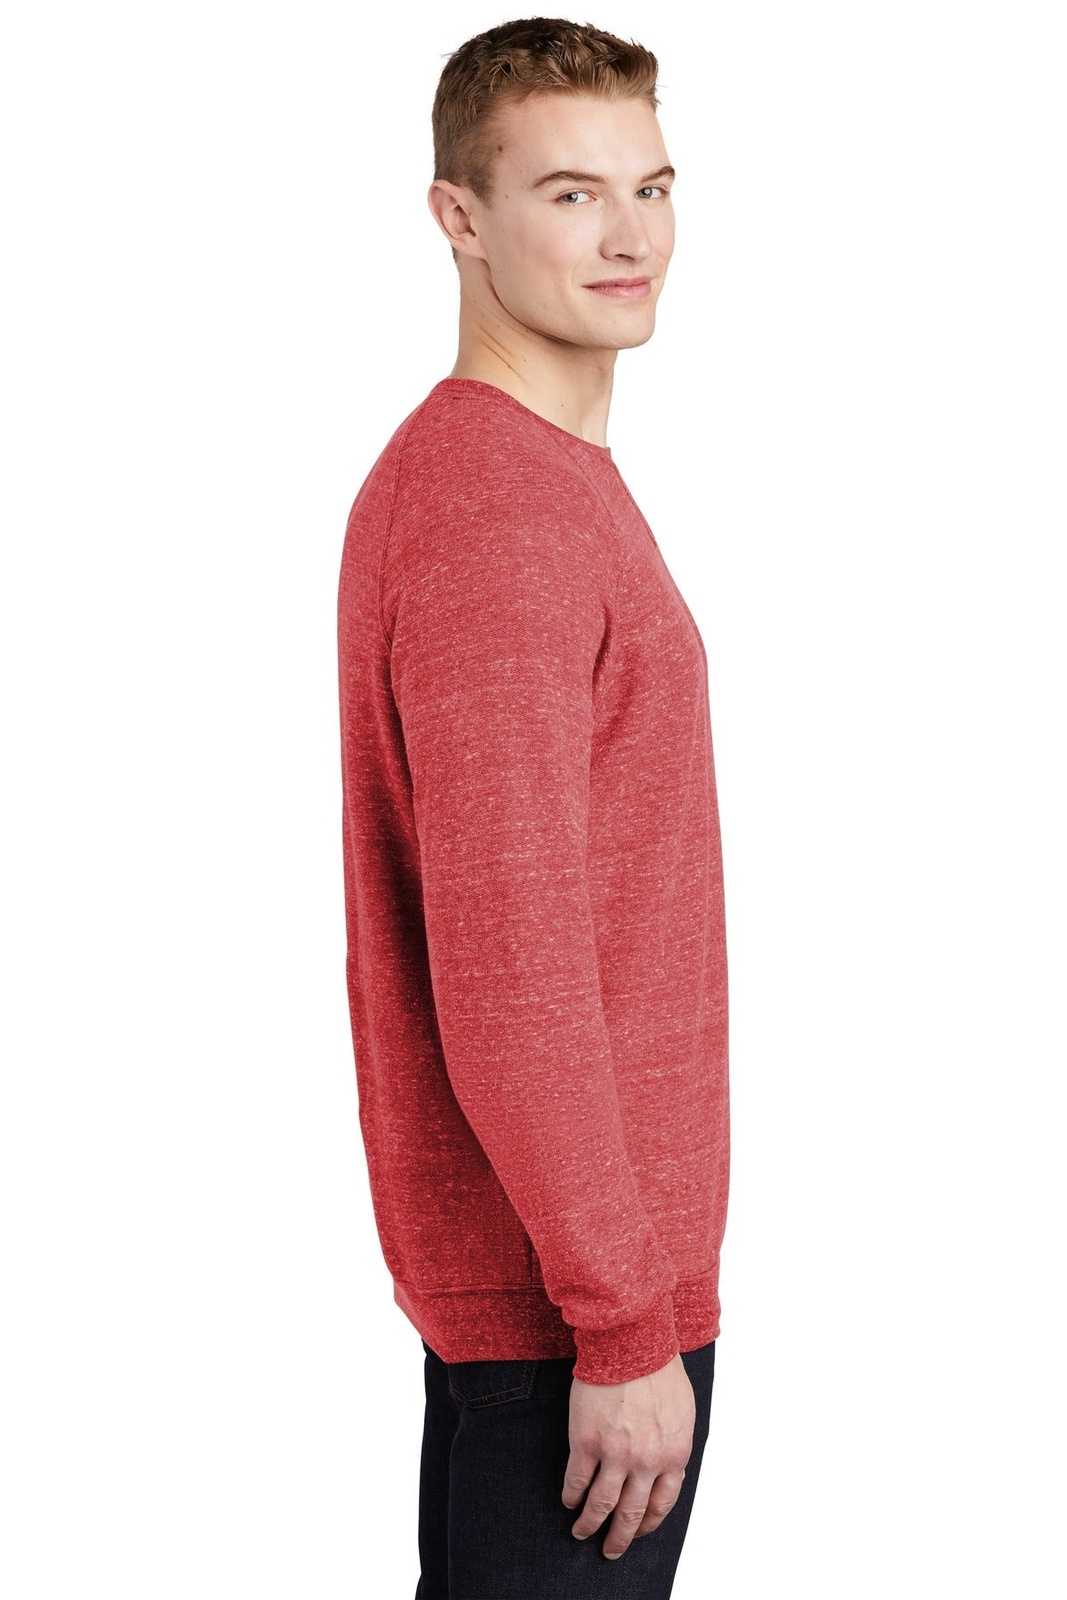 Jerzees 91M Snow Heather French Terry Raglan Crew - Red - HIT a Double